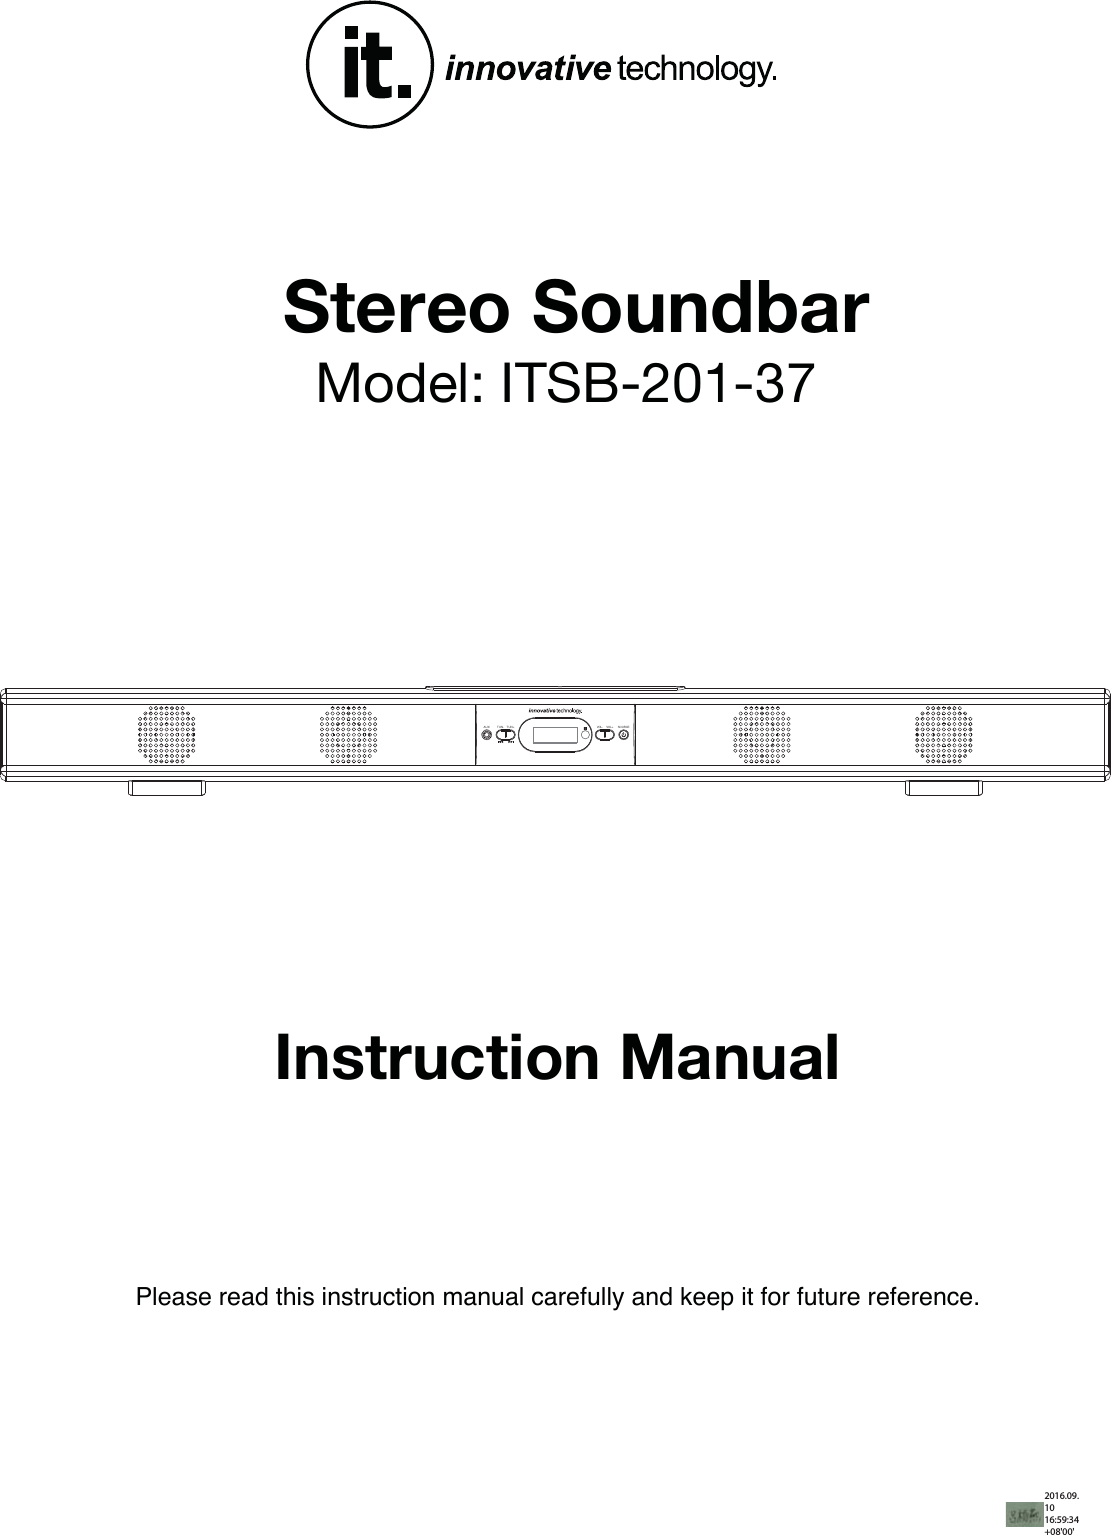 Please read this instruction manual carefully and keep it for future reference.Instruction Manual Stereo Soundbar Model: ITSB-201-37SOURCETUN- TUN+AUX VOL- VOL+2016.09.10 16:59:34 +08&apos;00&apos;